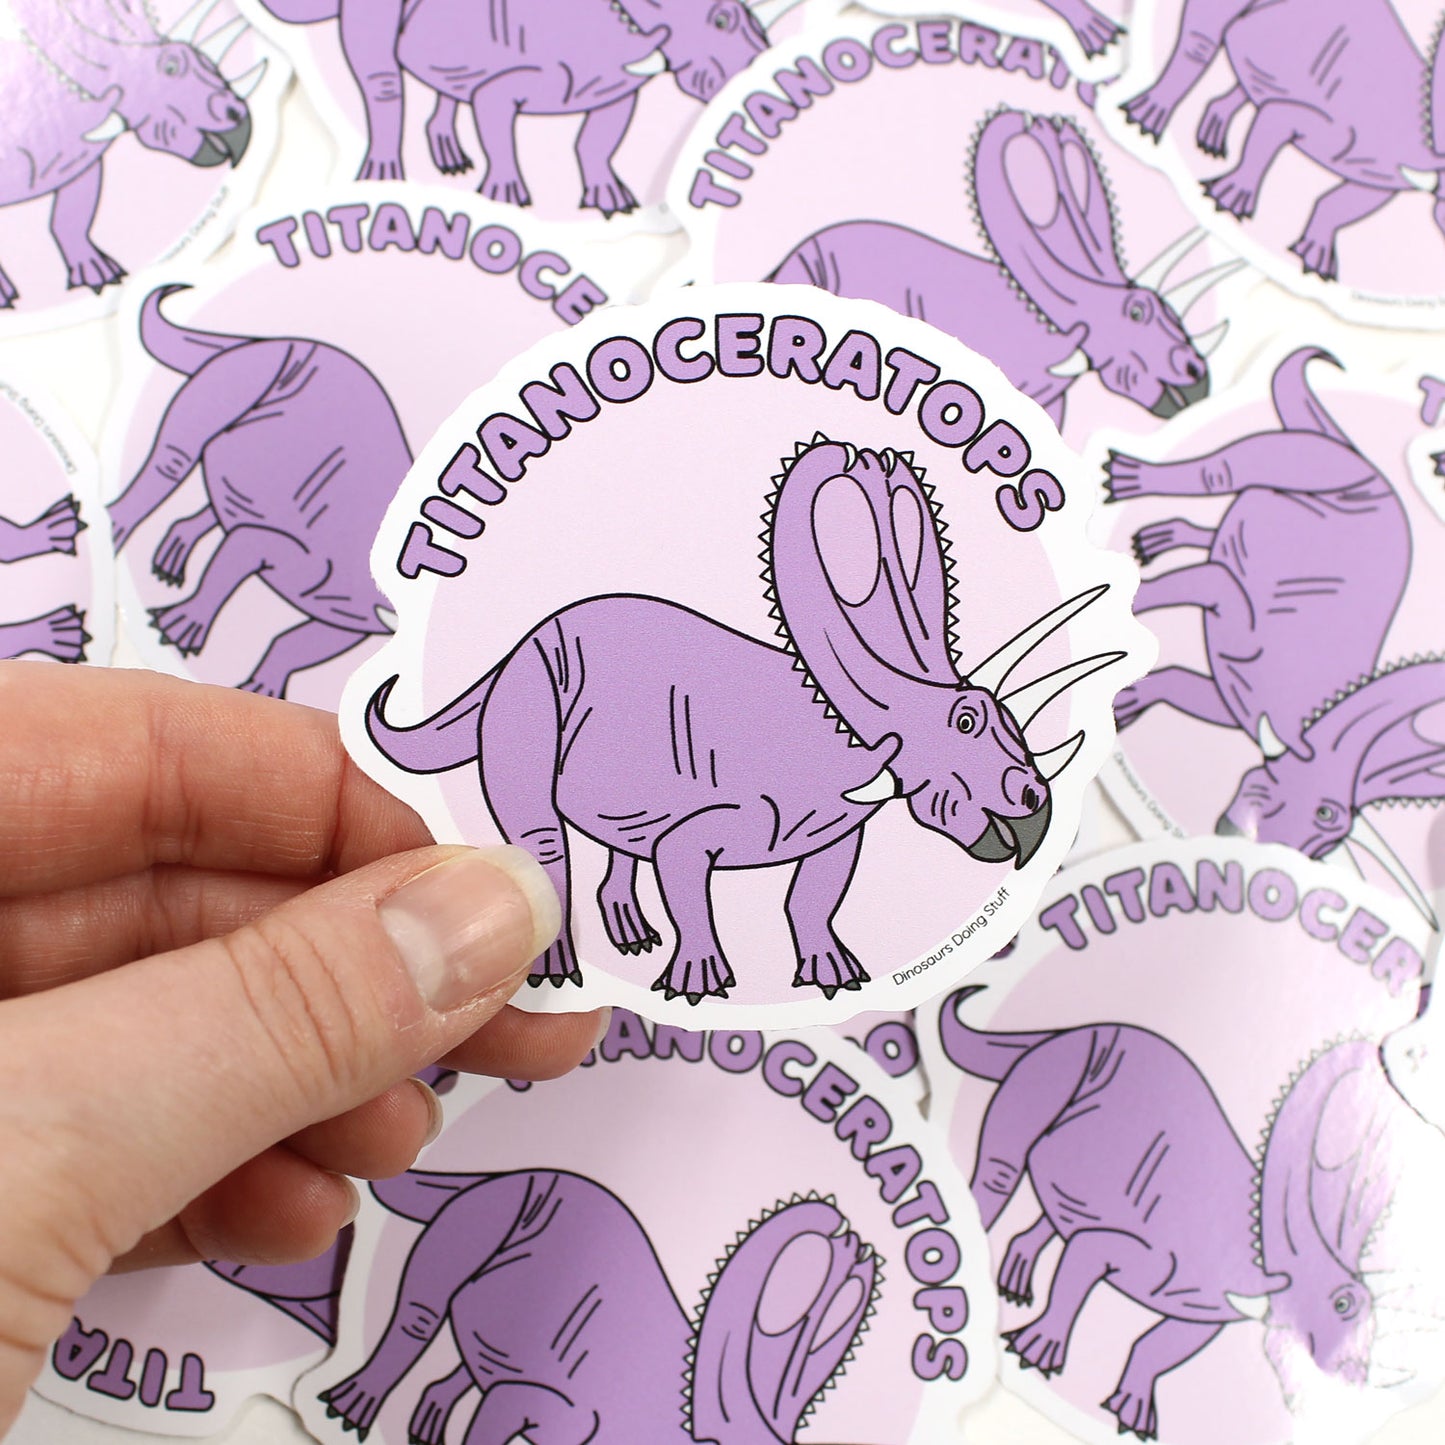 Titanoceratops dinosaur sticker held by a hand with scattered stickers behind it